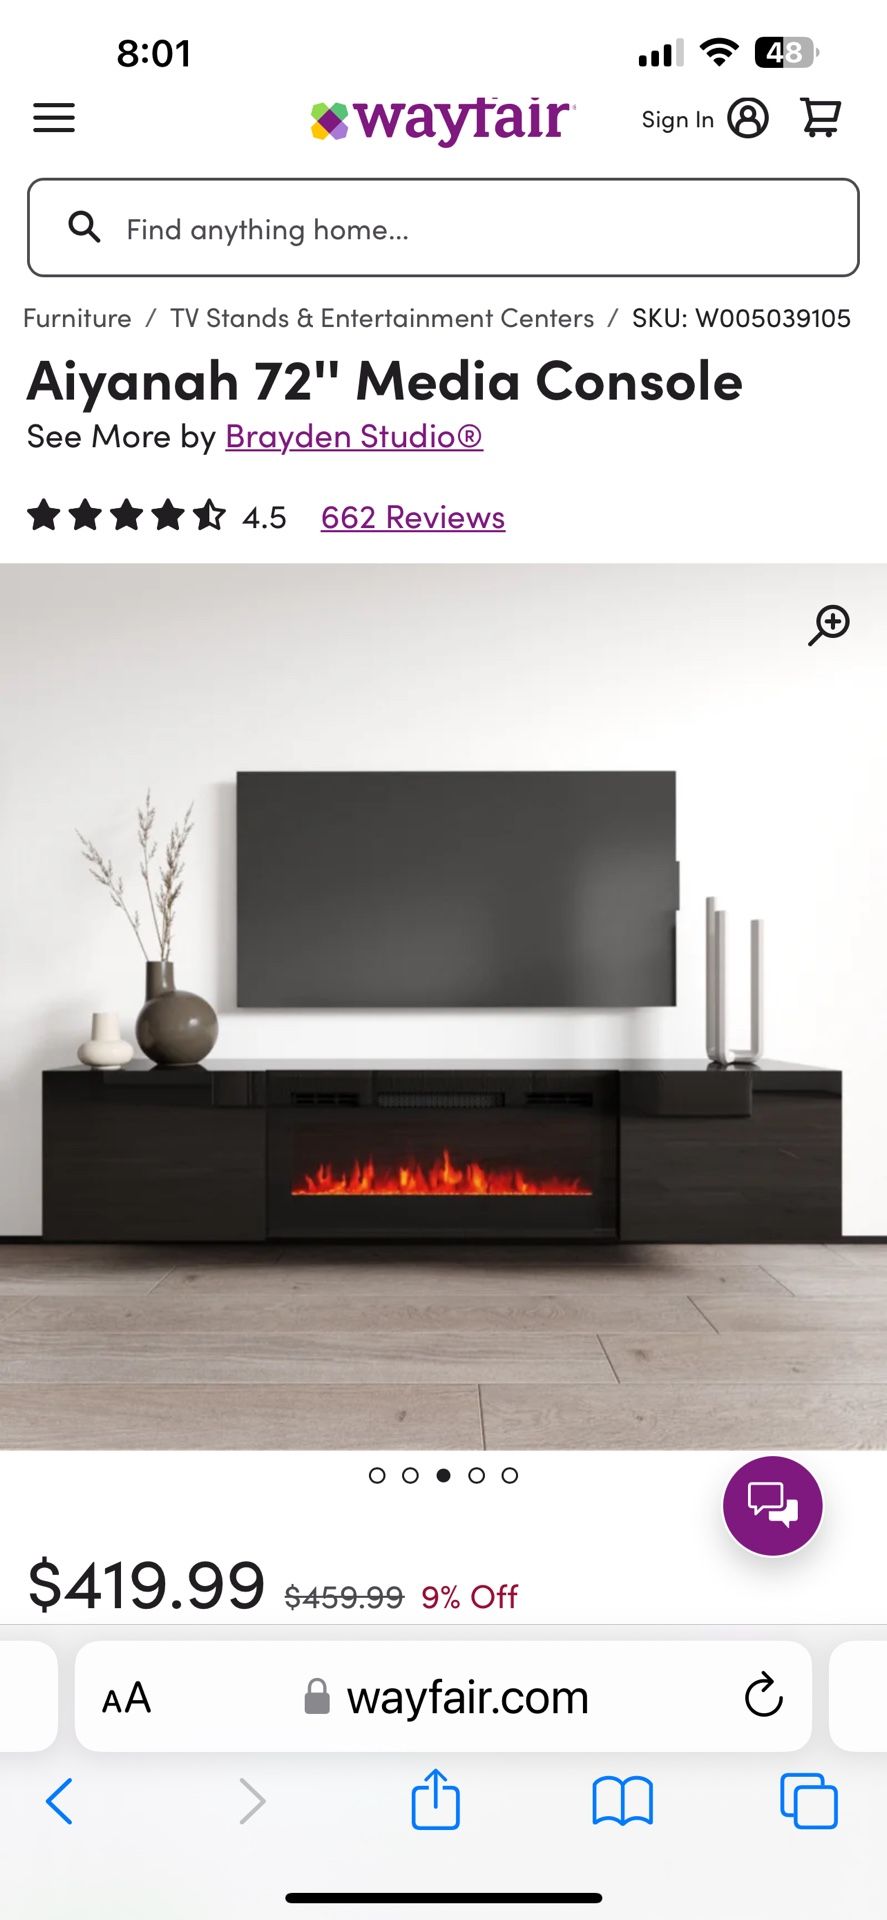 Electric fireplace With Shelving